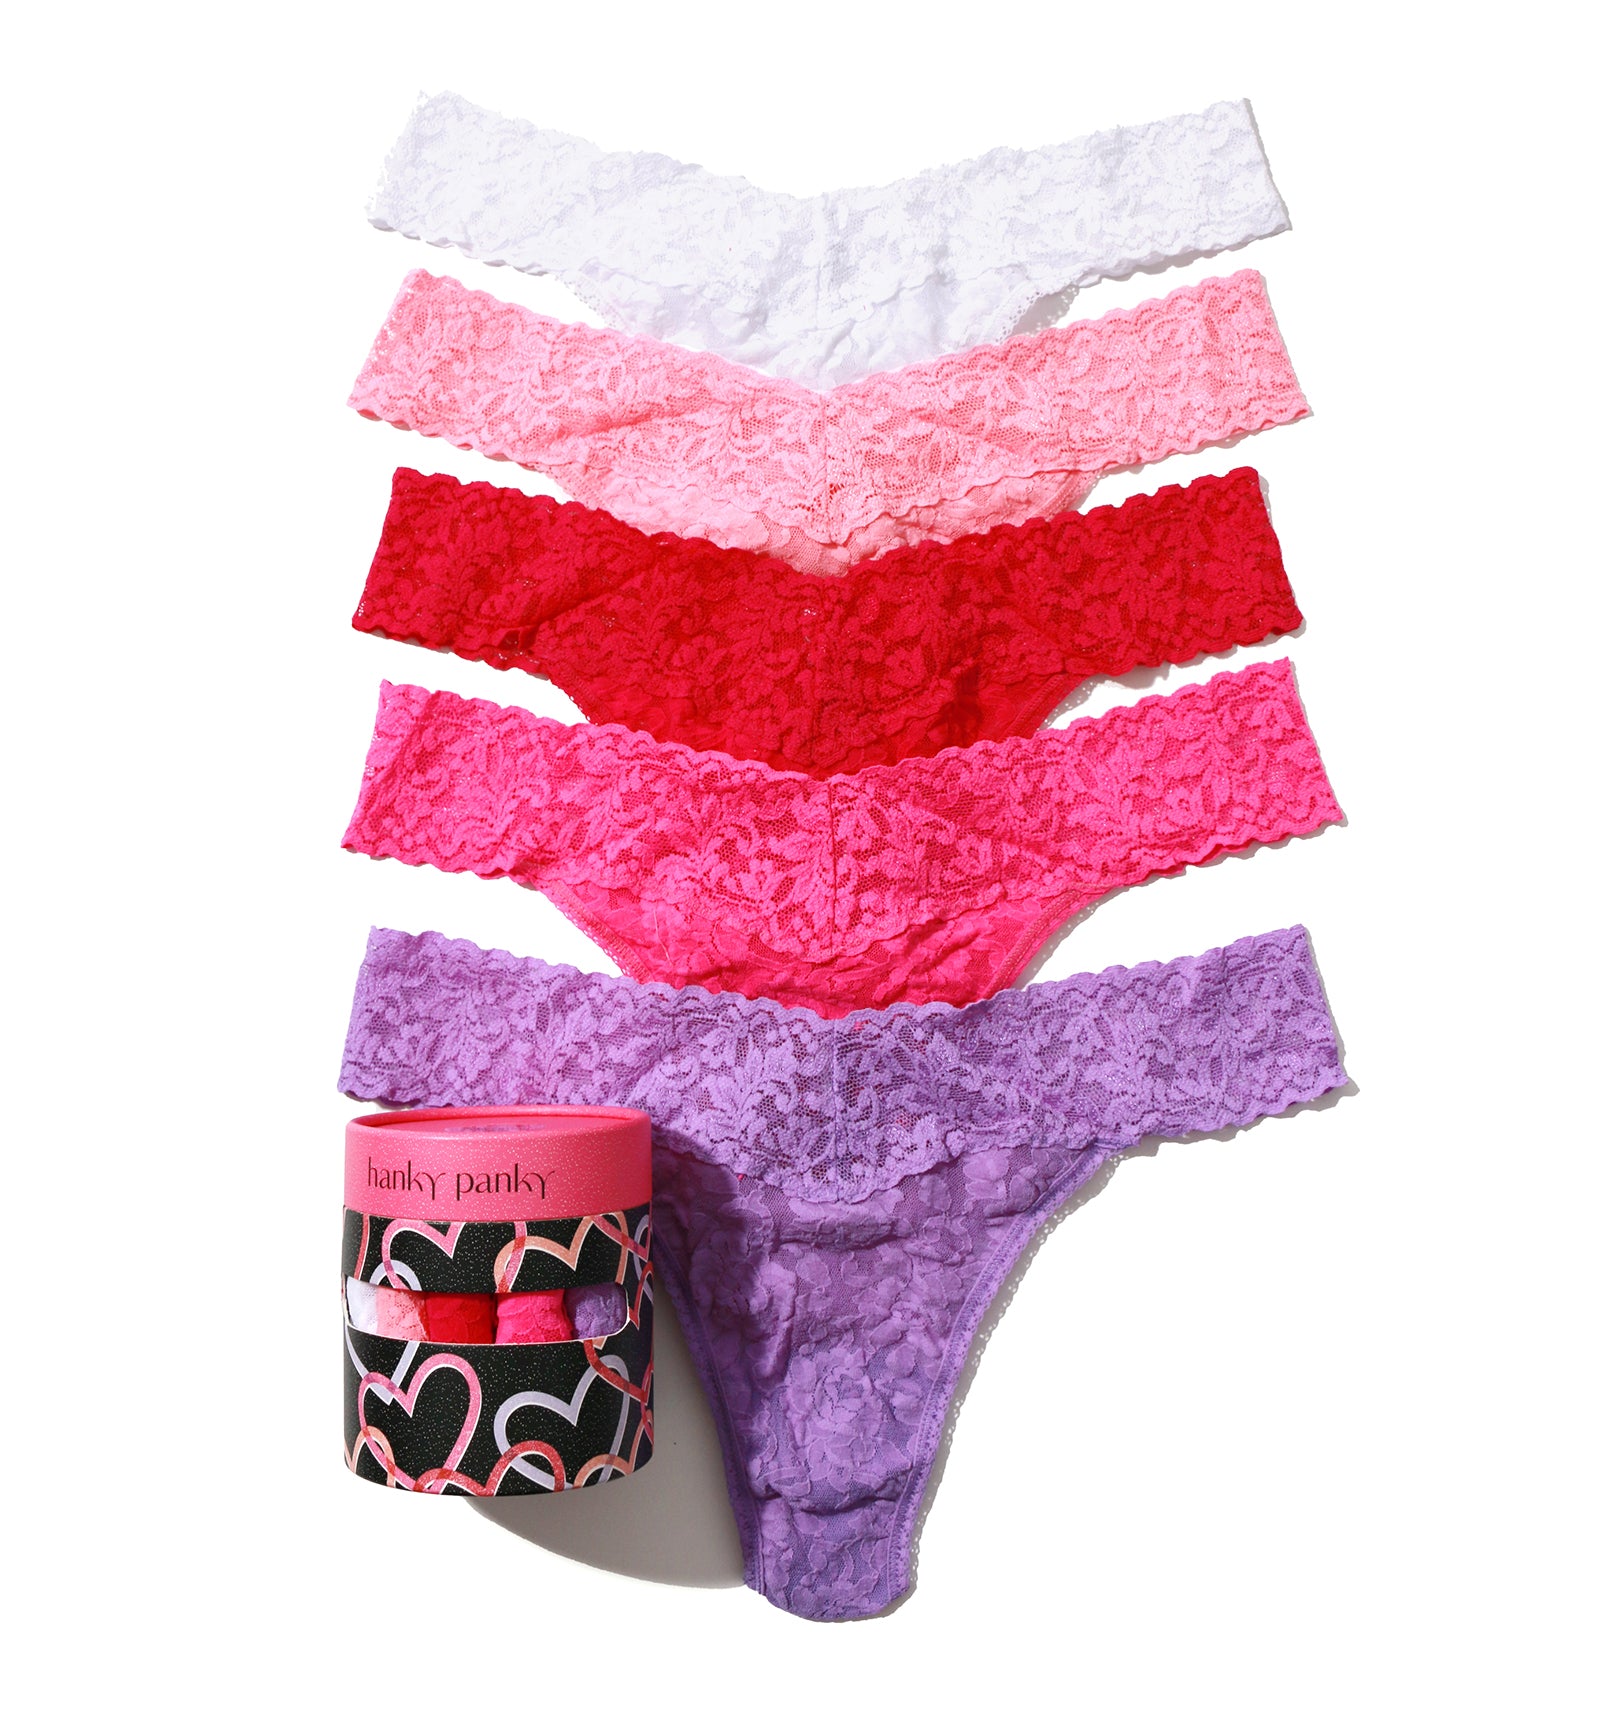 Hanky Panky 5-PACK Signature Lace Original Rise Thong (48115PK),Holiday23 FPRV - FPRV,One Size